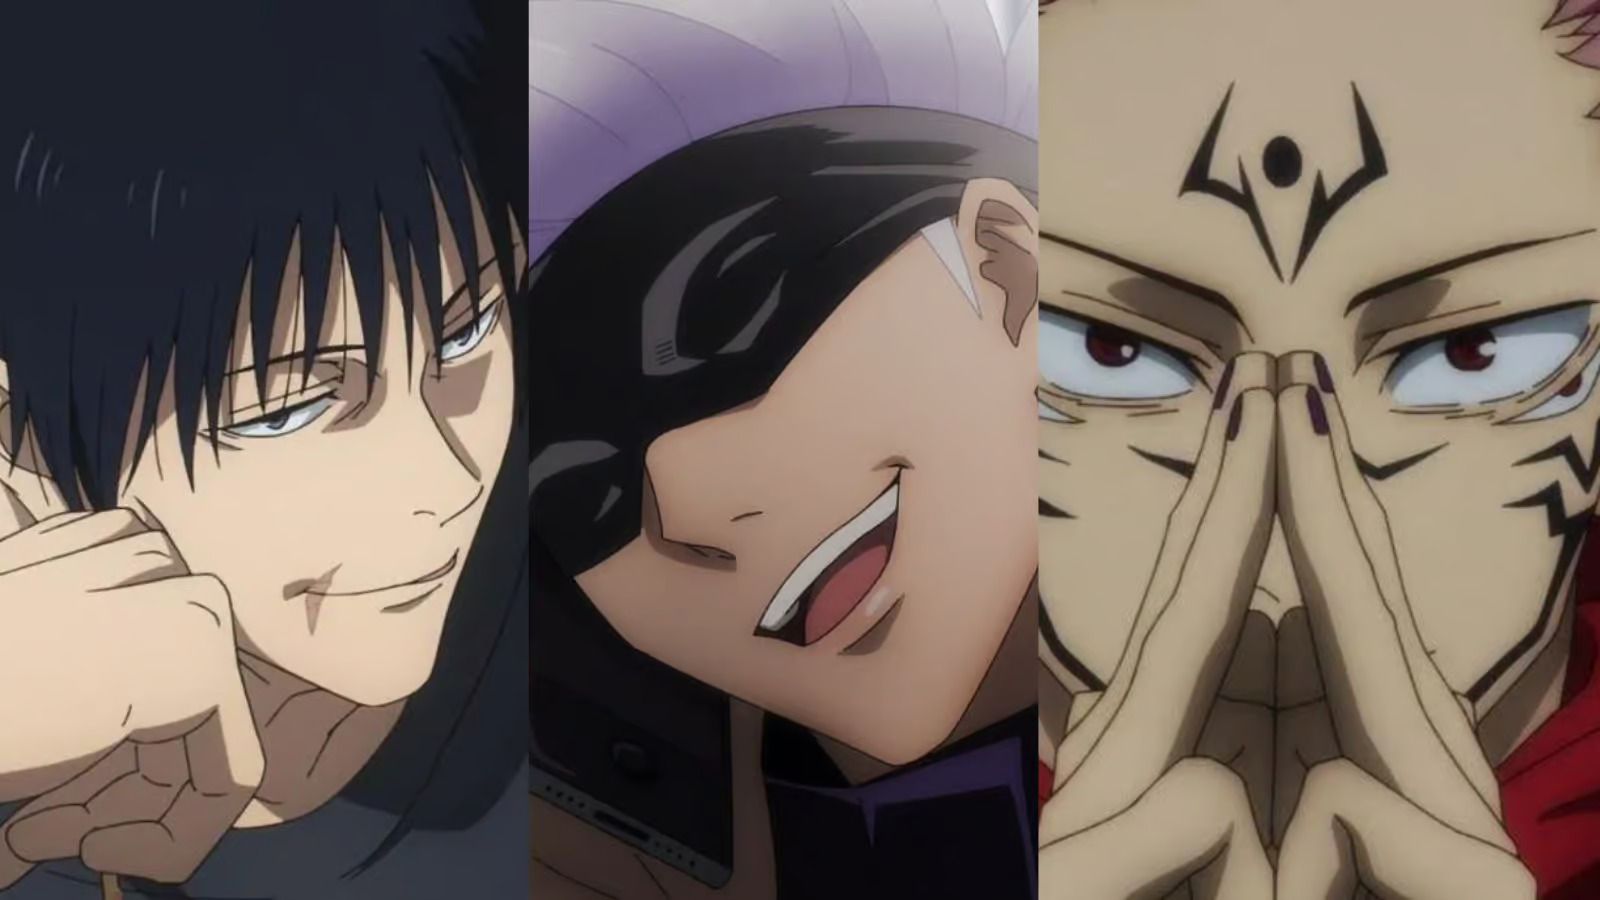 Top 10 Fighters in Jujutsu Kaisen, Ranked